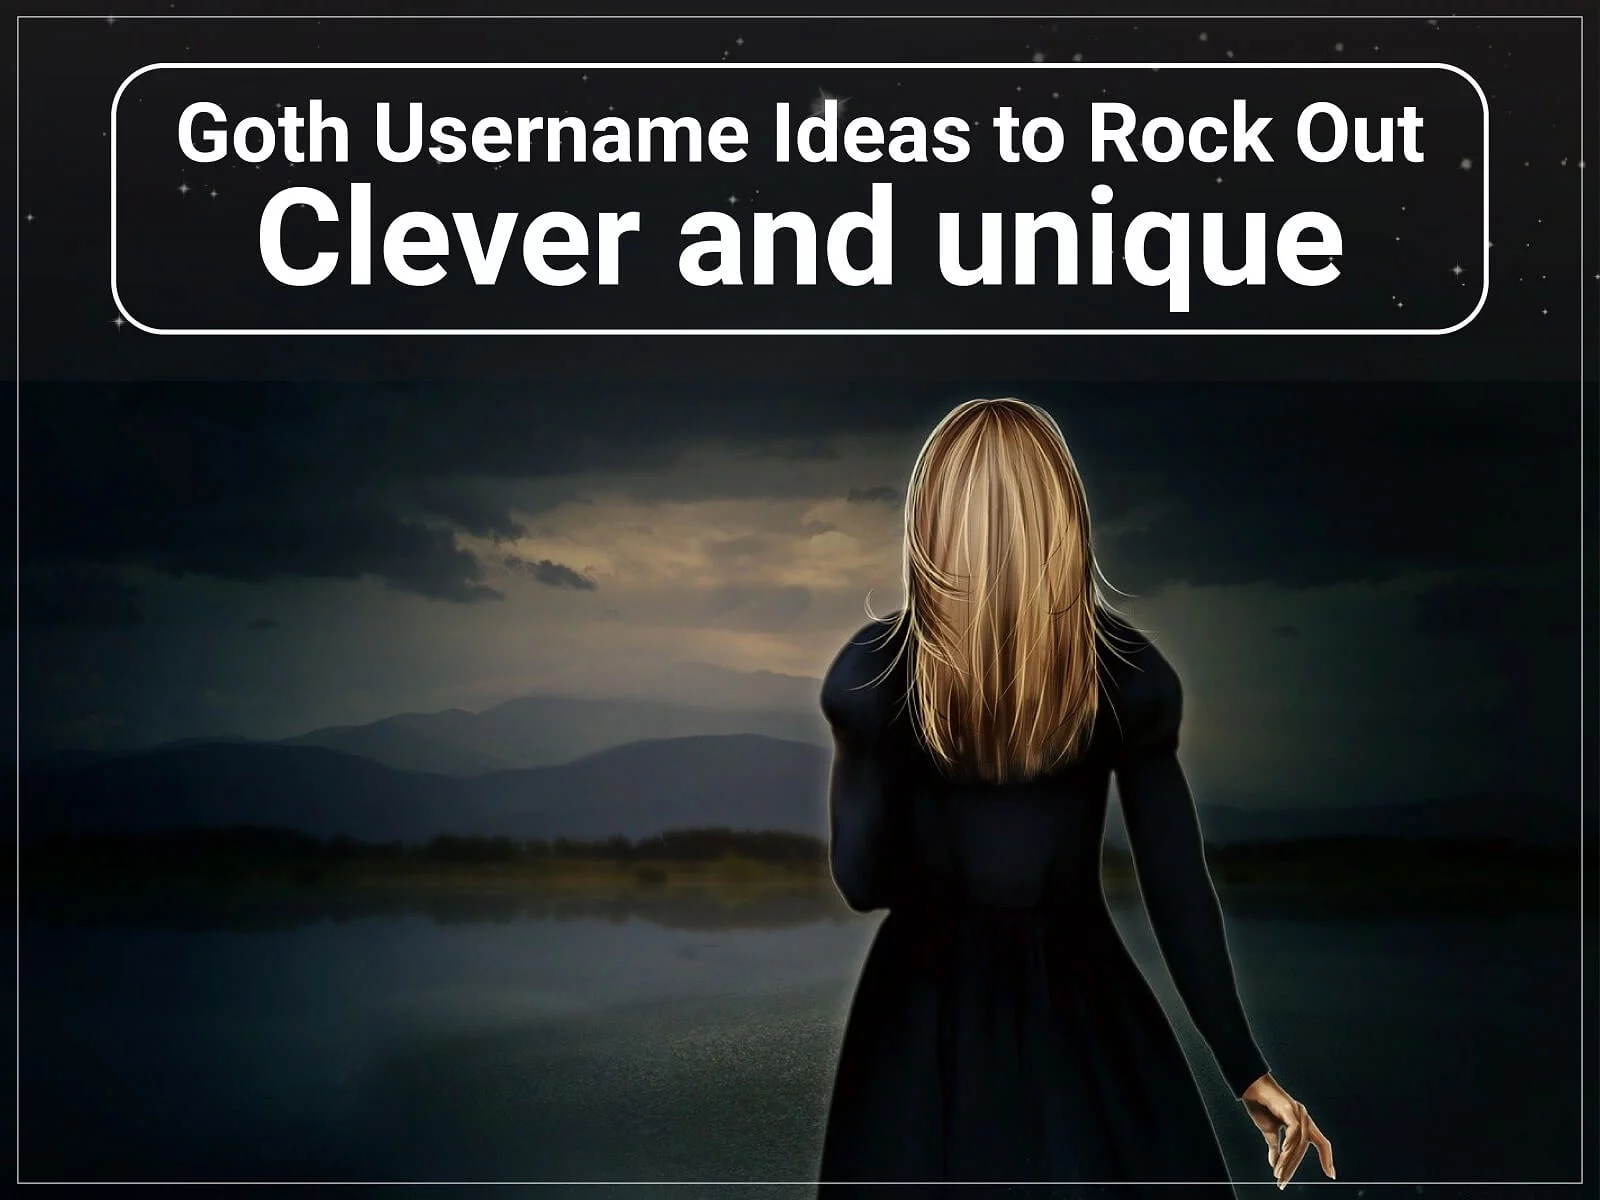 goth-username-ideas-to-rock-out-clever-and-unique